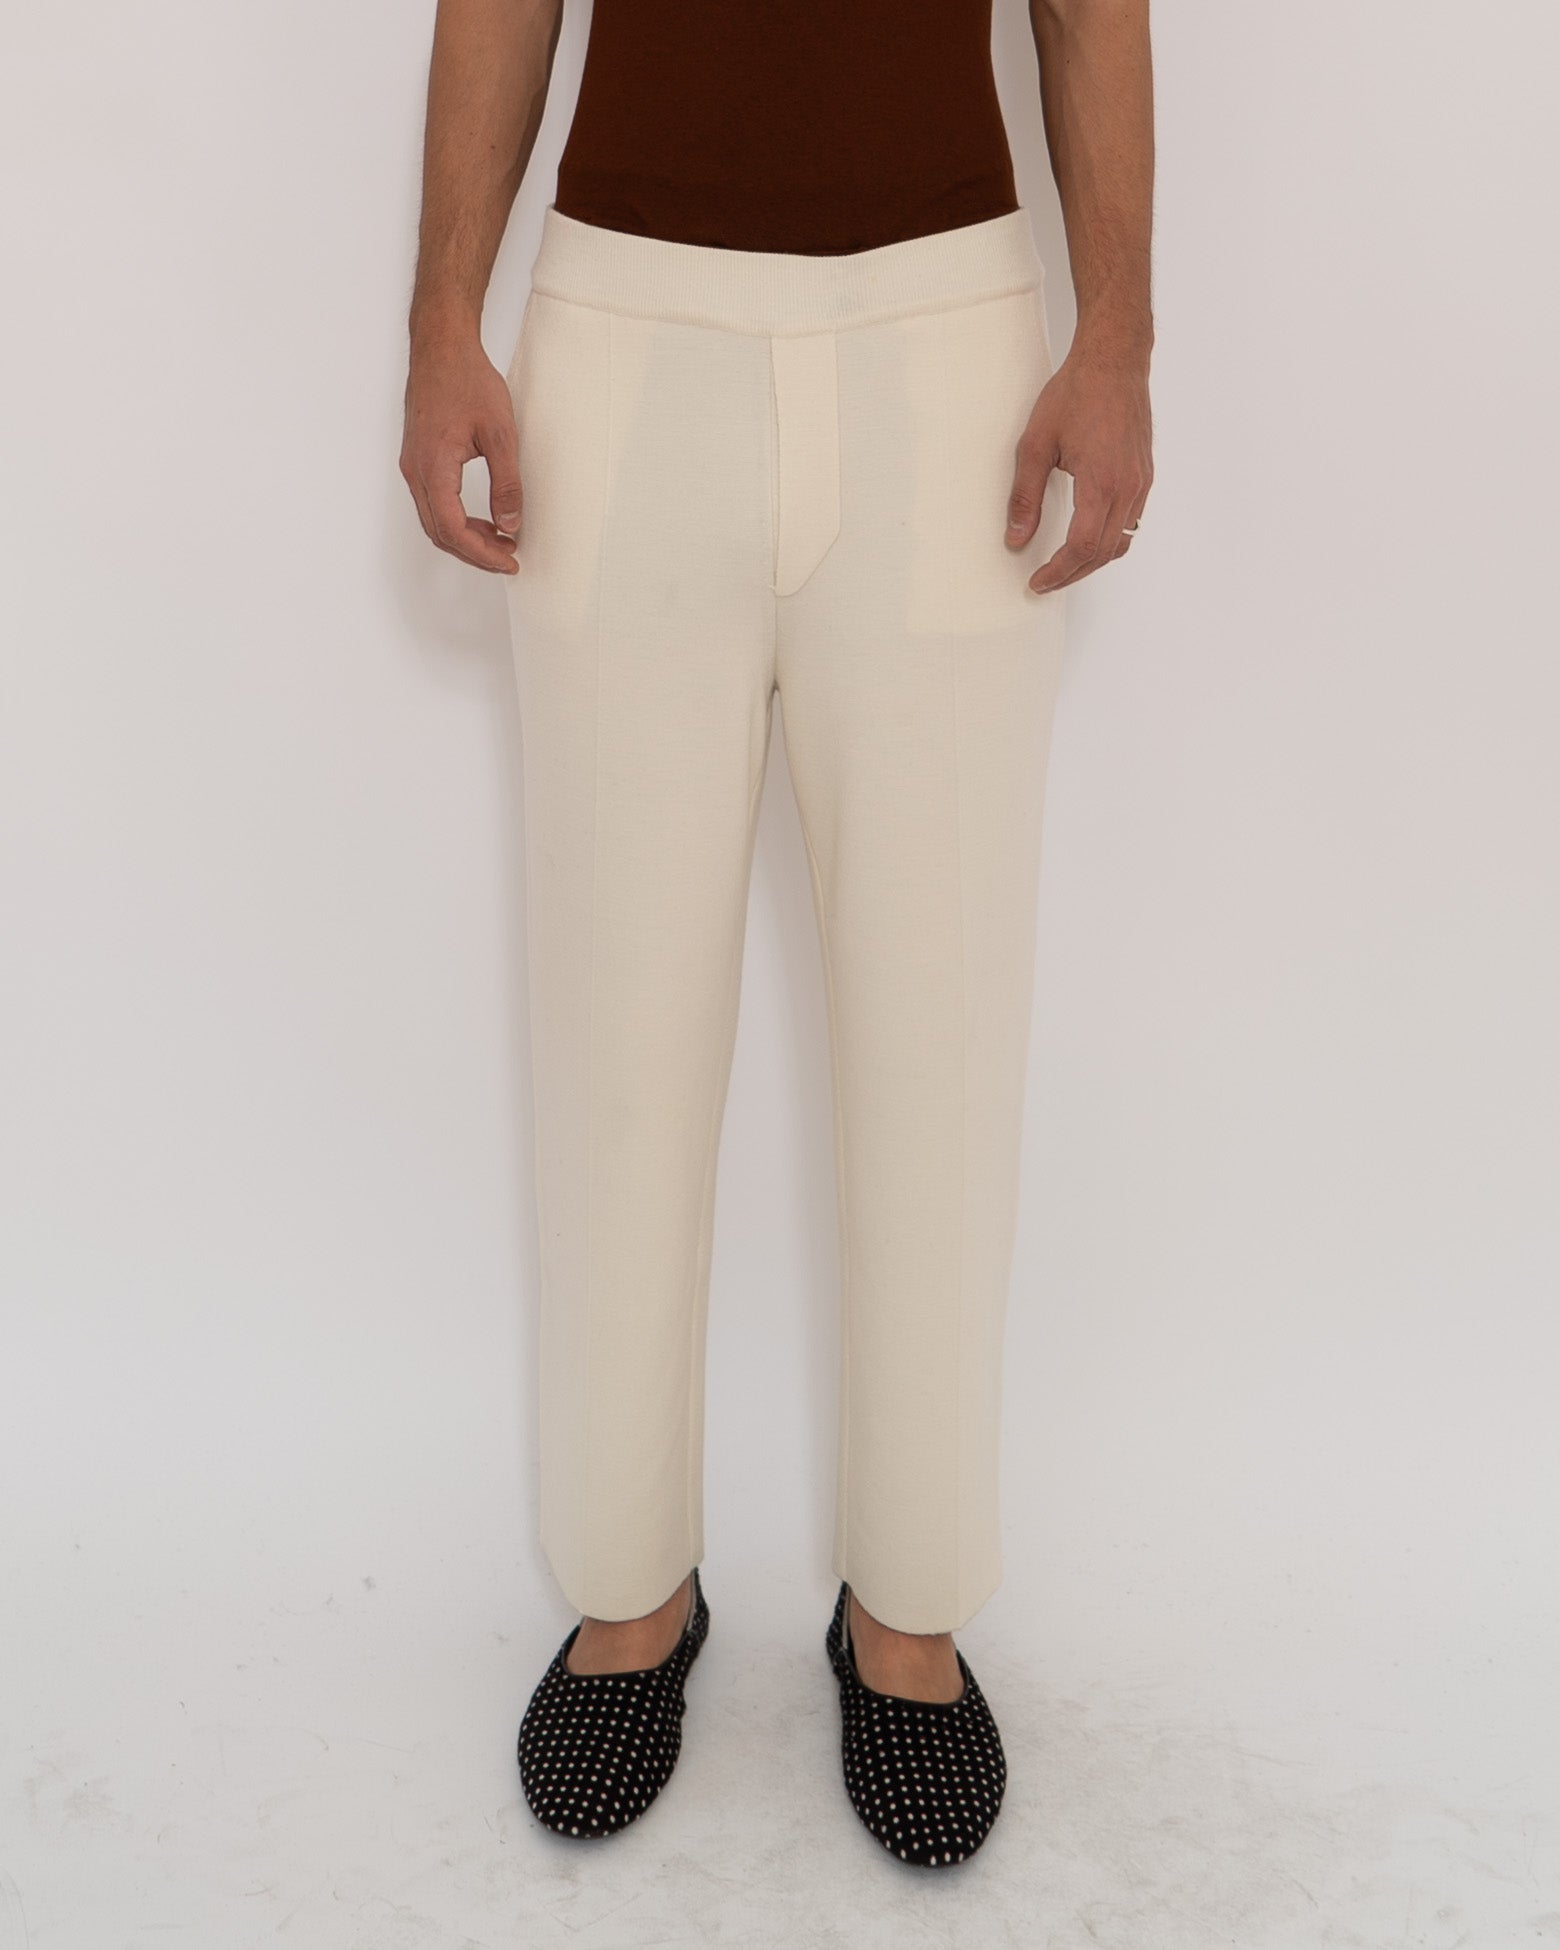 FW19 Knitted Invidia White Trousers Sample